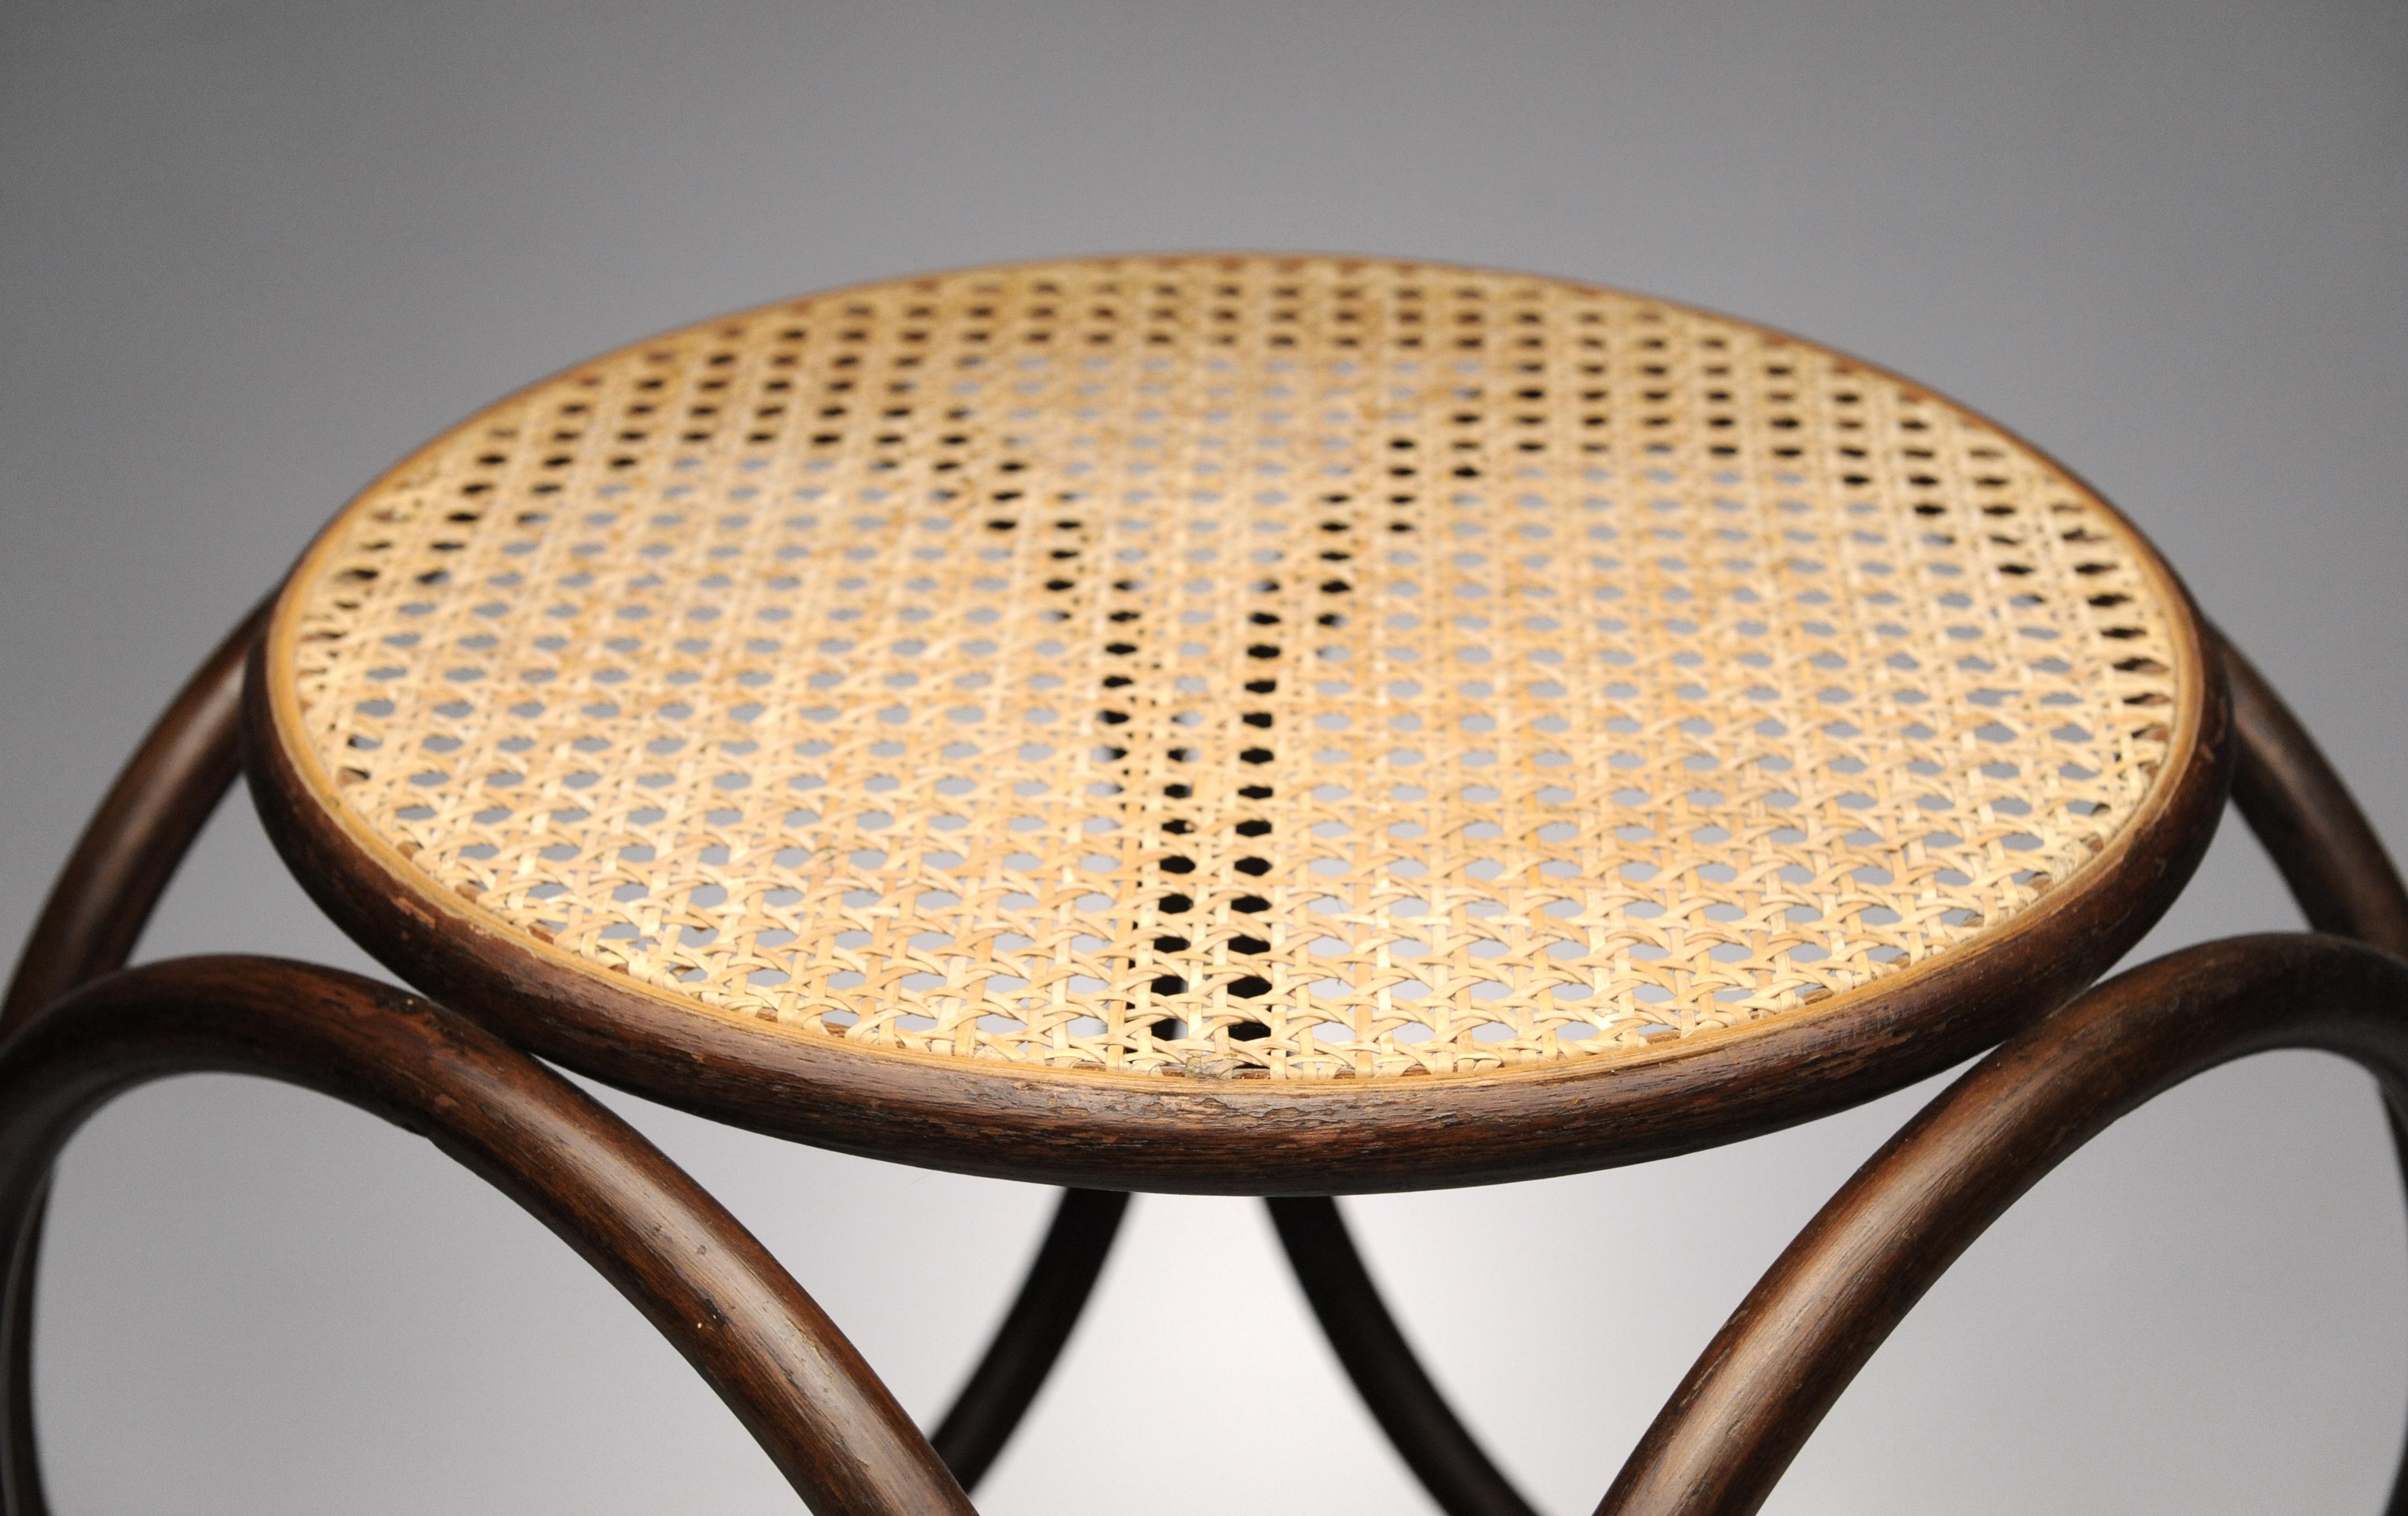 Cane Vintage Bentwood Stool by Thonet